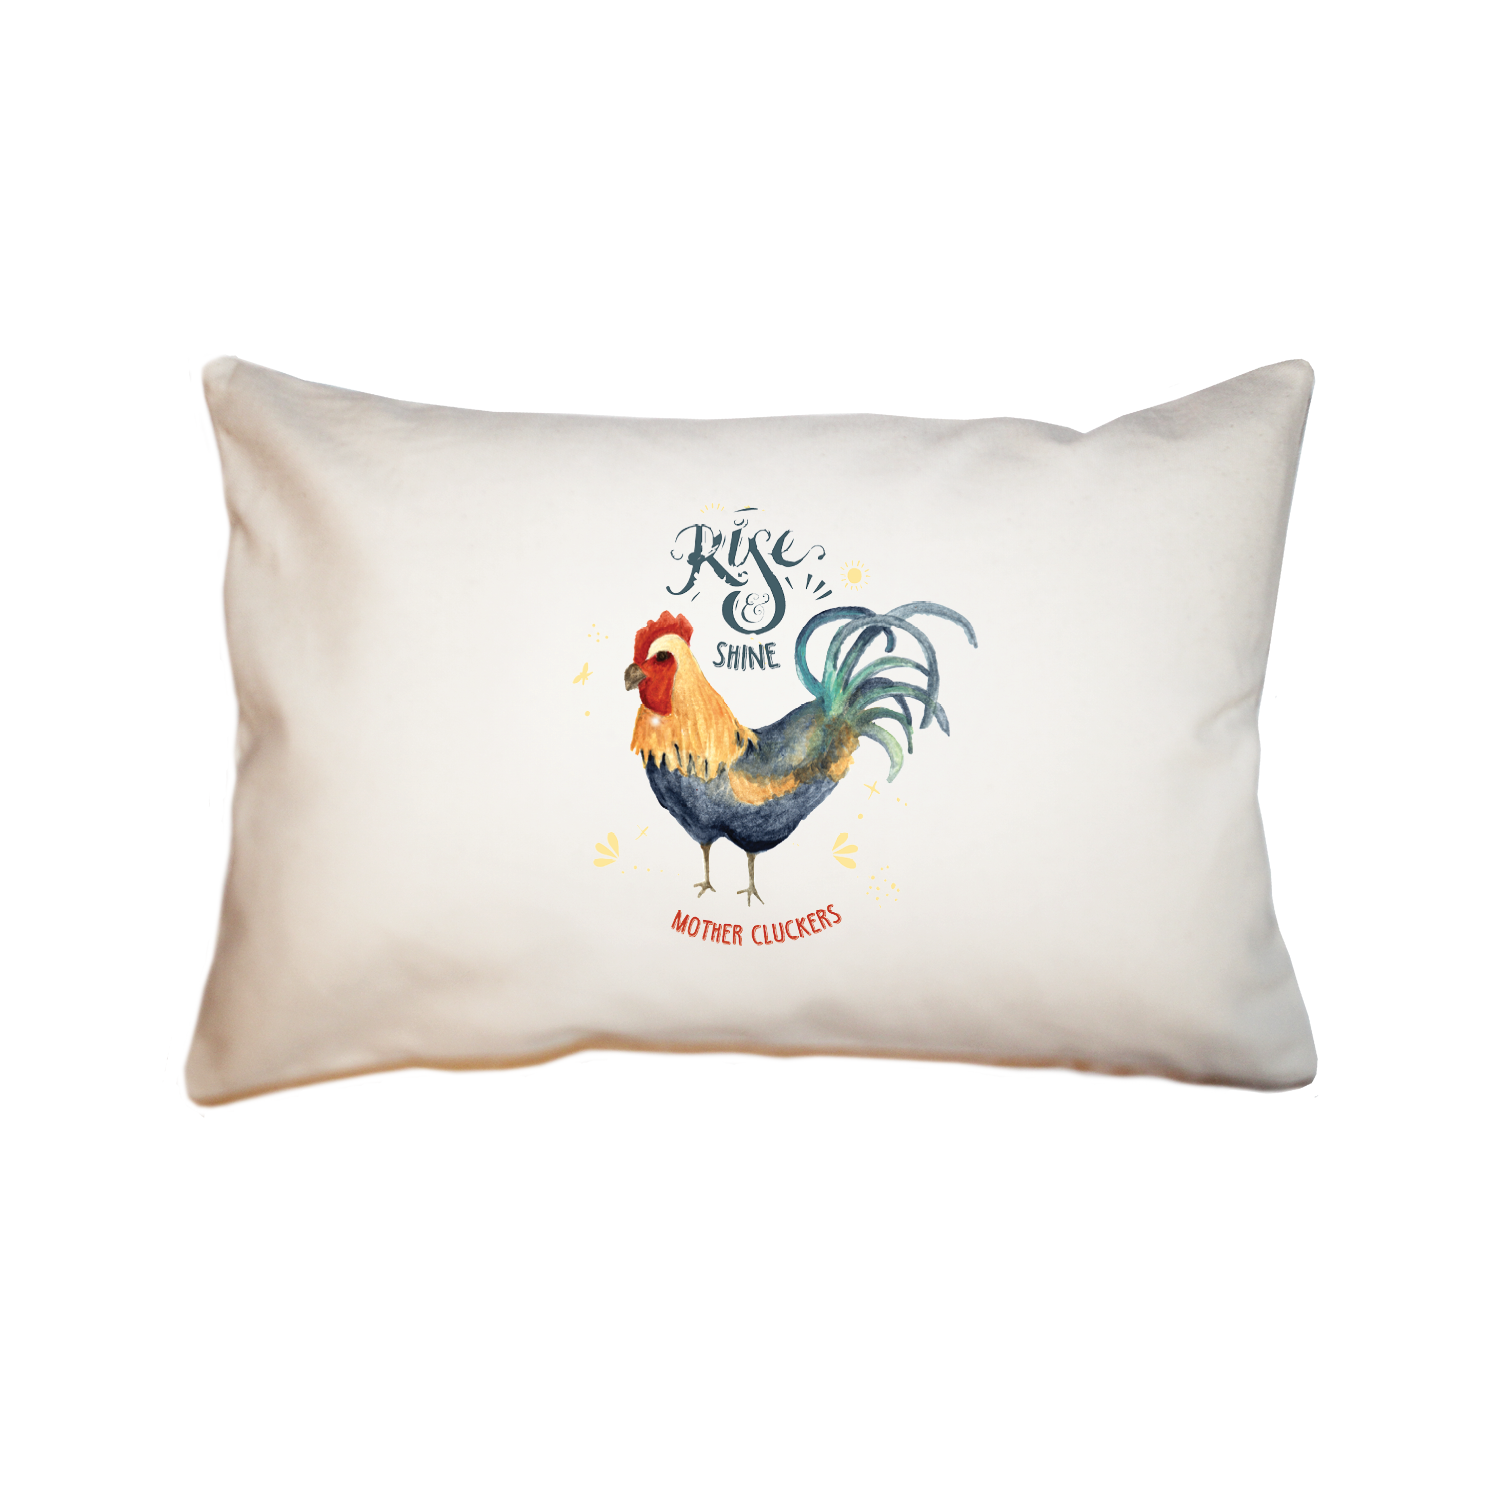 rise and shine mother cluckers large rectangle pillow